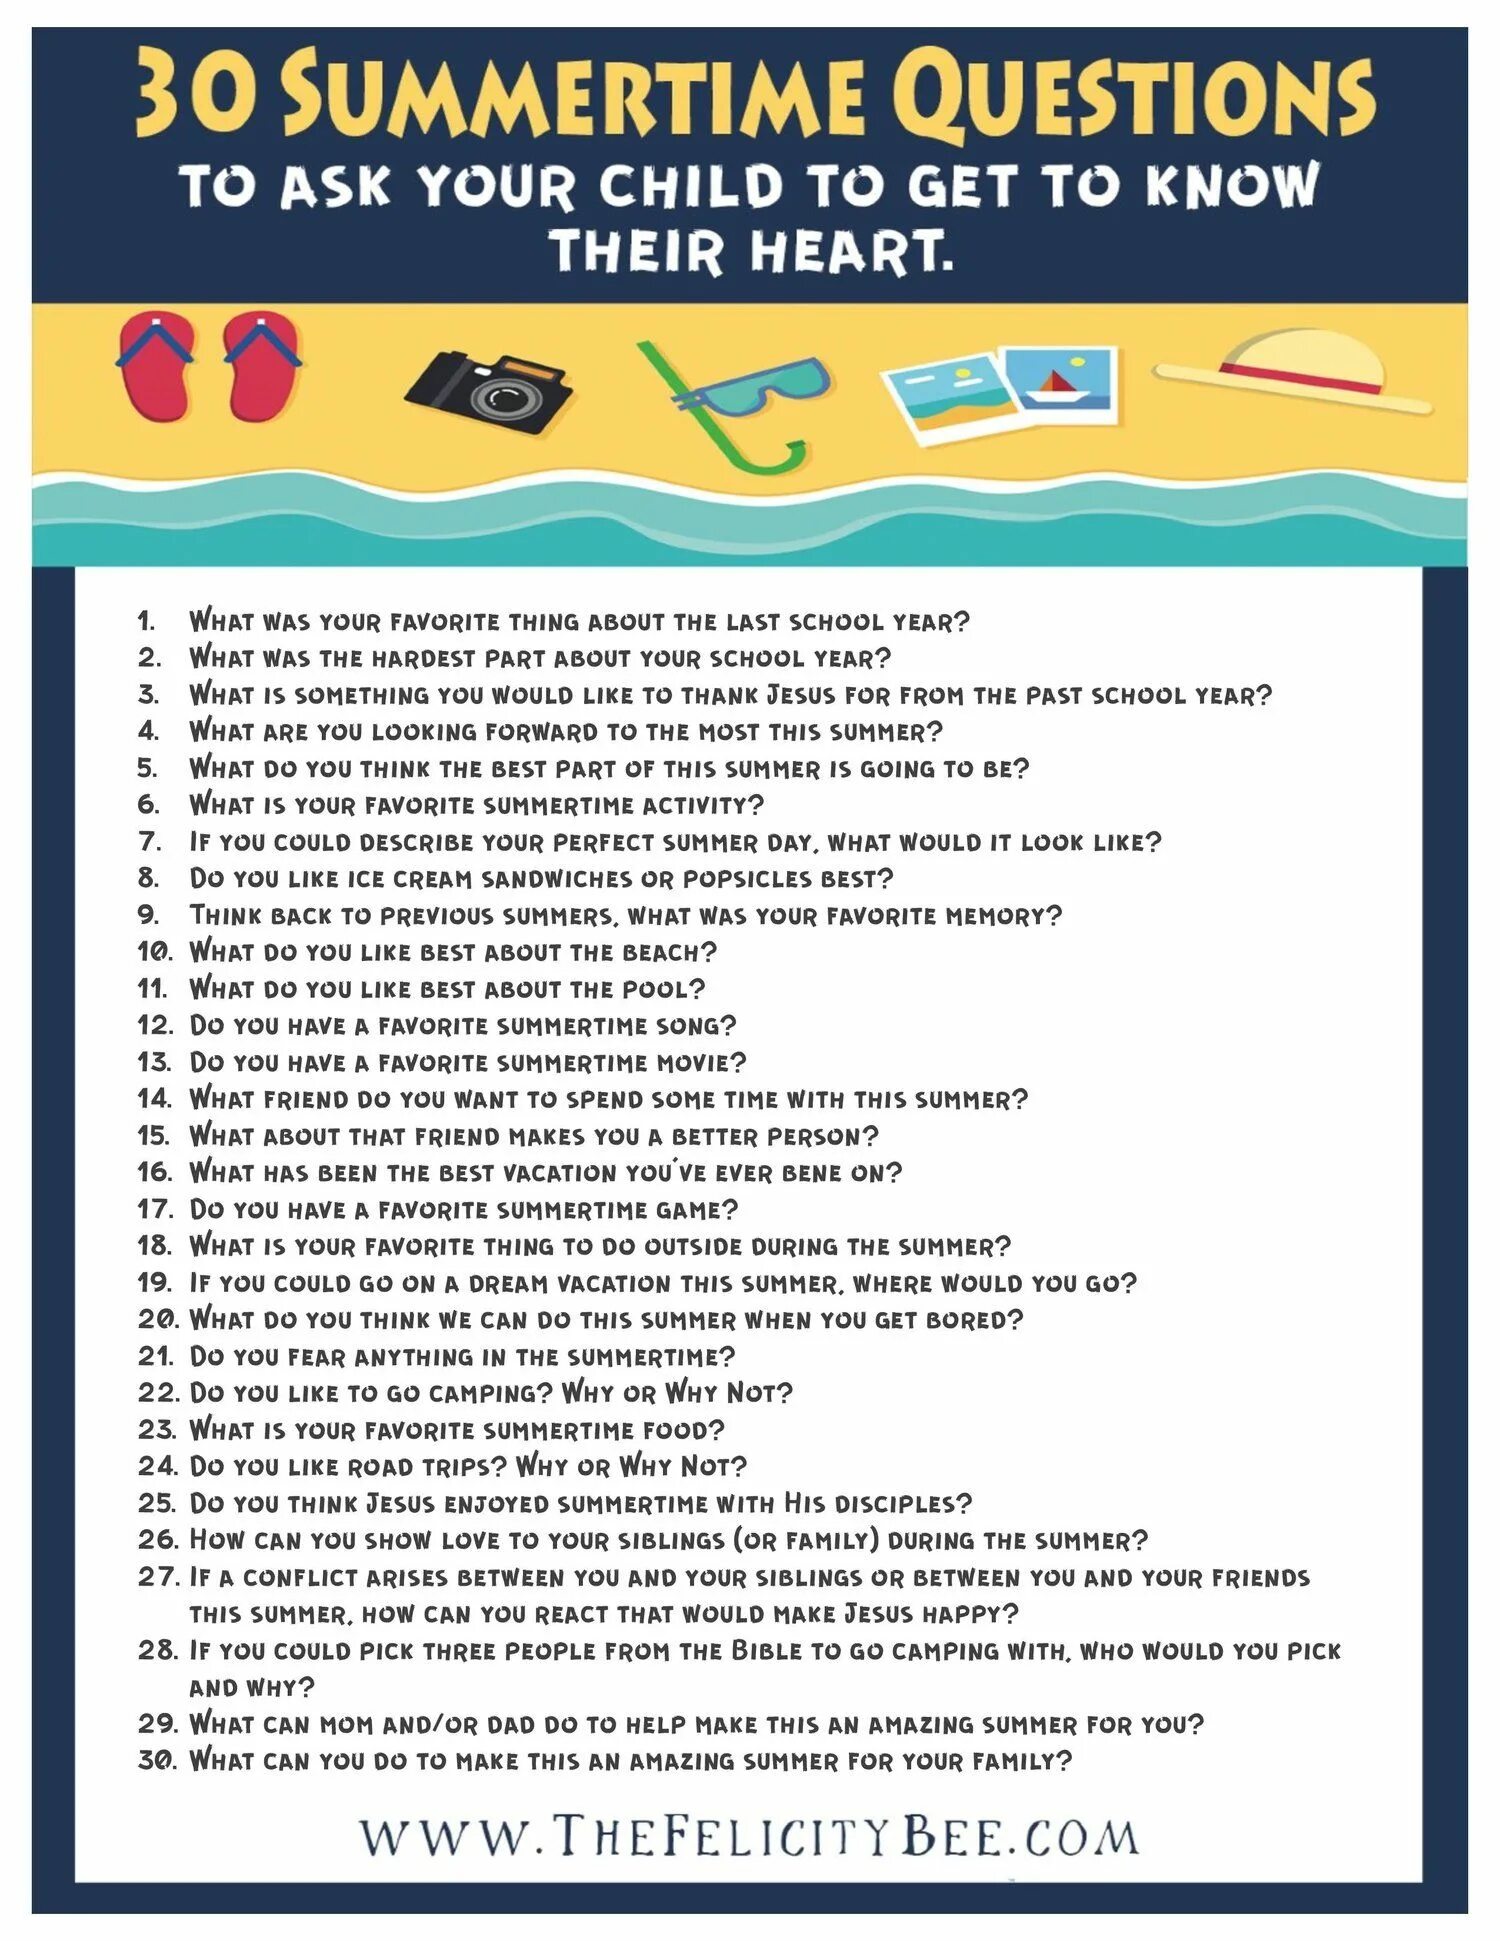 Questions about Summer. Summer Holidays questions for discussion. Английский topics for discussion. Summer Holidays questions for Kids. Talk about your favorite